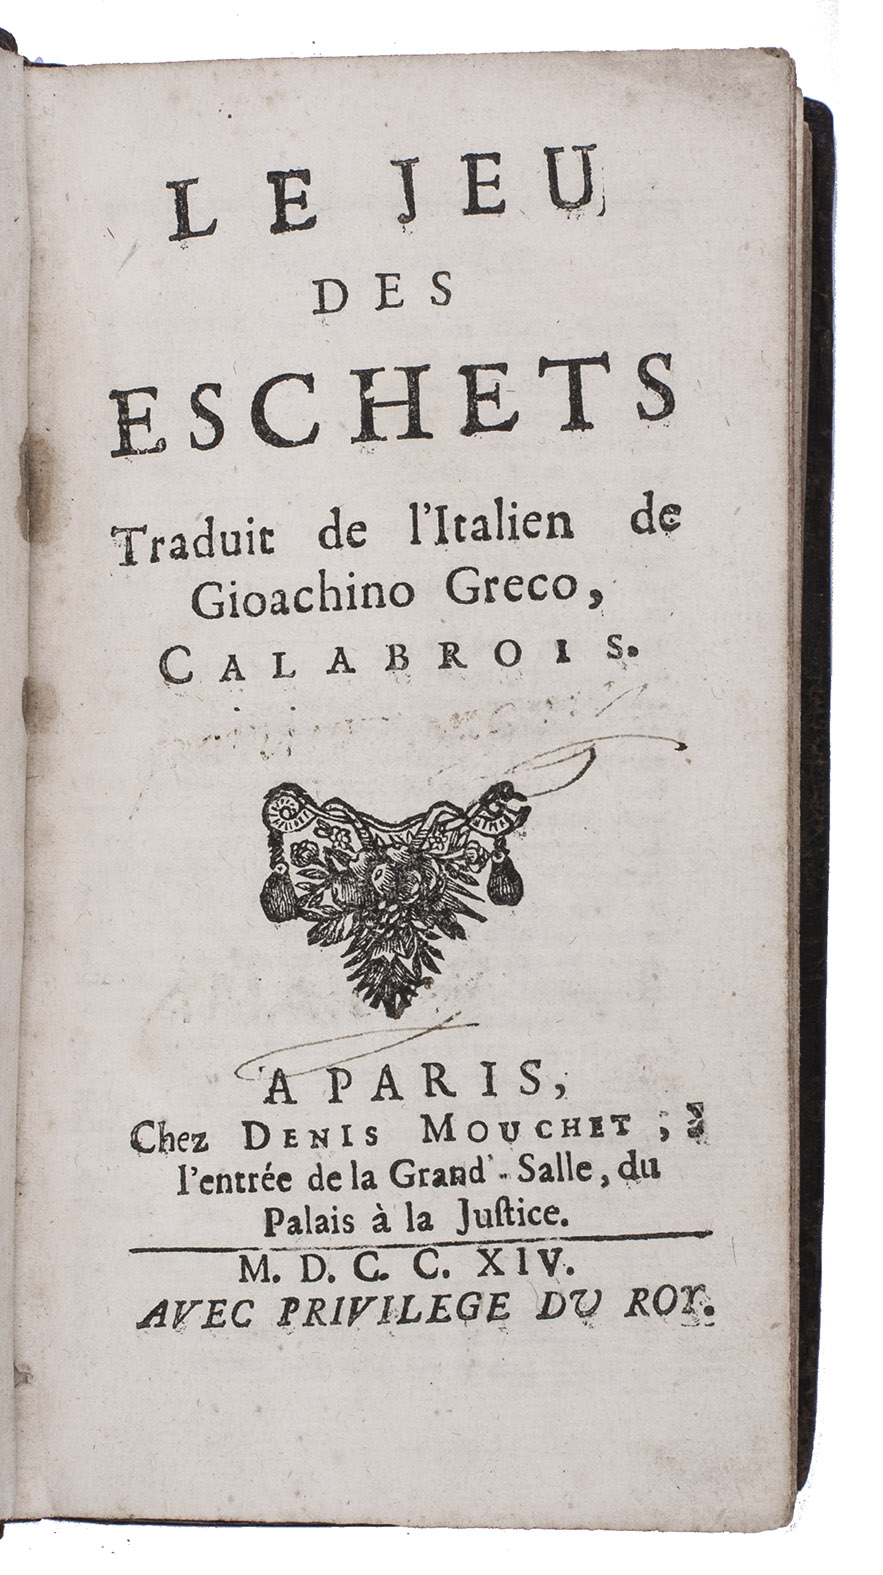 GRECO, Giocchino. - Le jeu des eschets. Traduit de l'Italien.Paris, Denis Mouchet, 1714. 12mo. With a woodcut decoration on title-page and a woodcut headpiece in text. Contemporary mottled calf, richly gold-tooled spine.